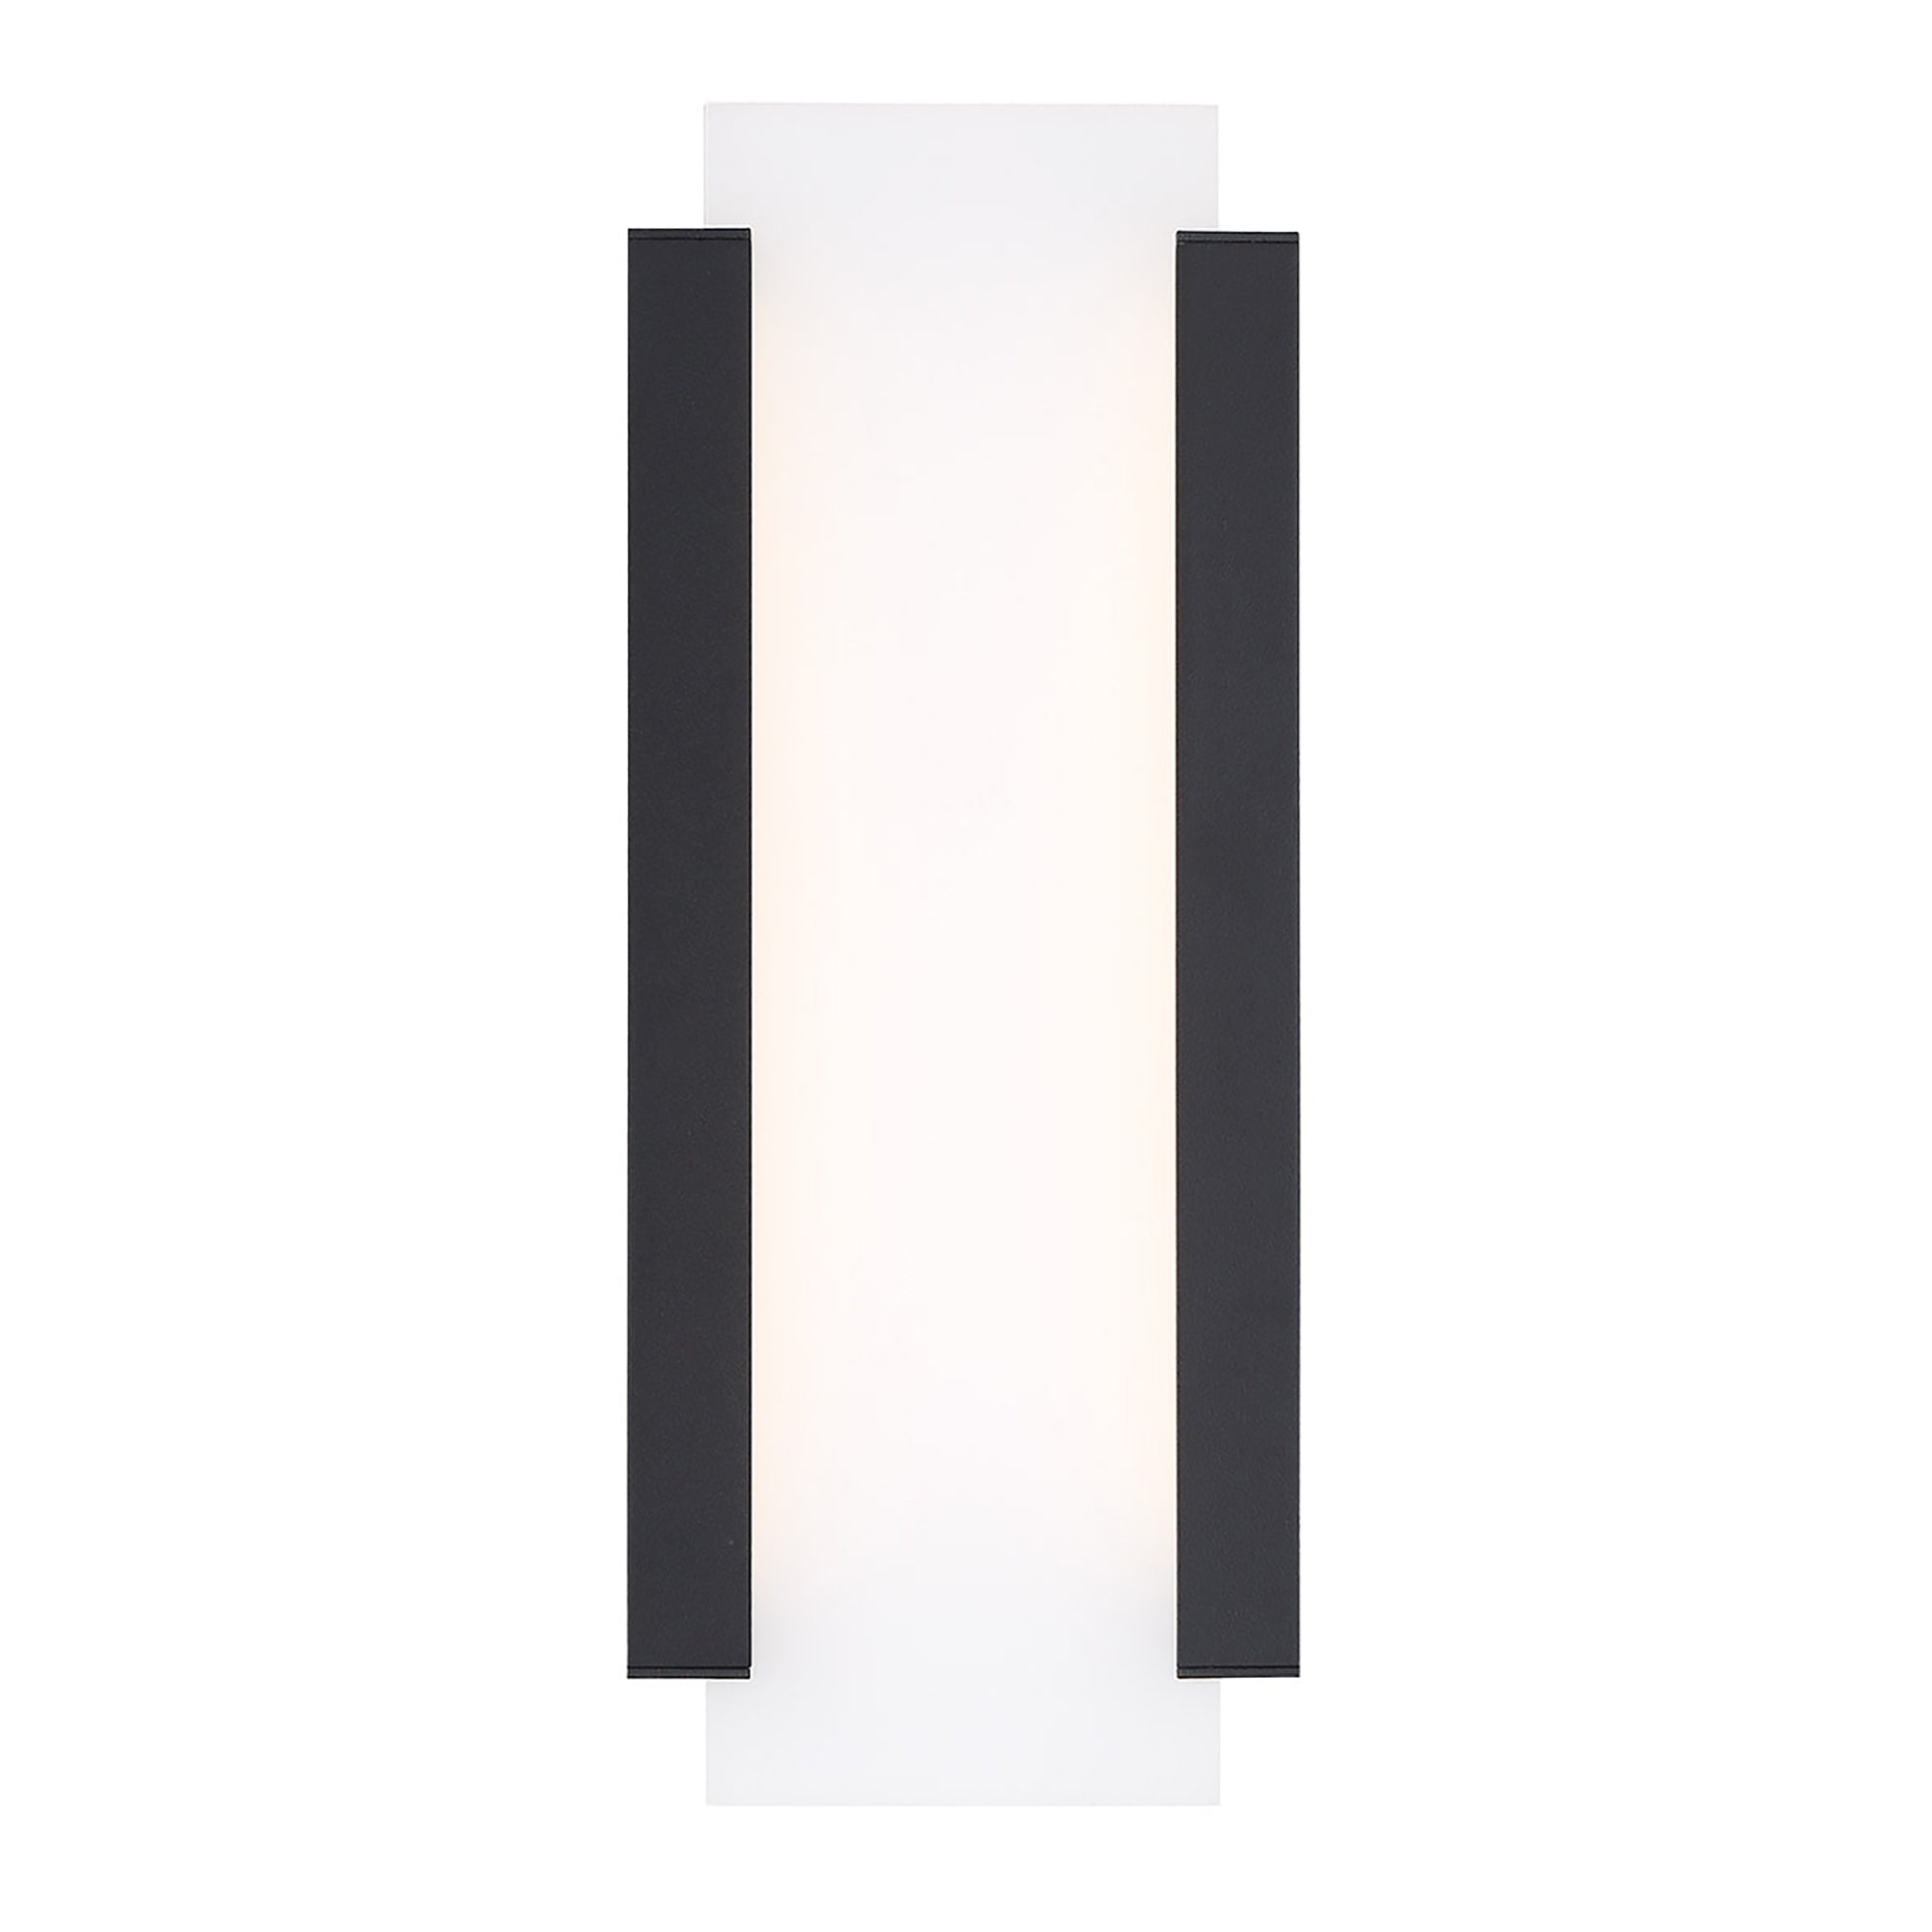 Fiction 14.1" LED Indoor/Outdoor Wall Light